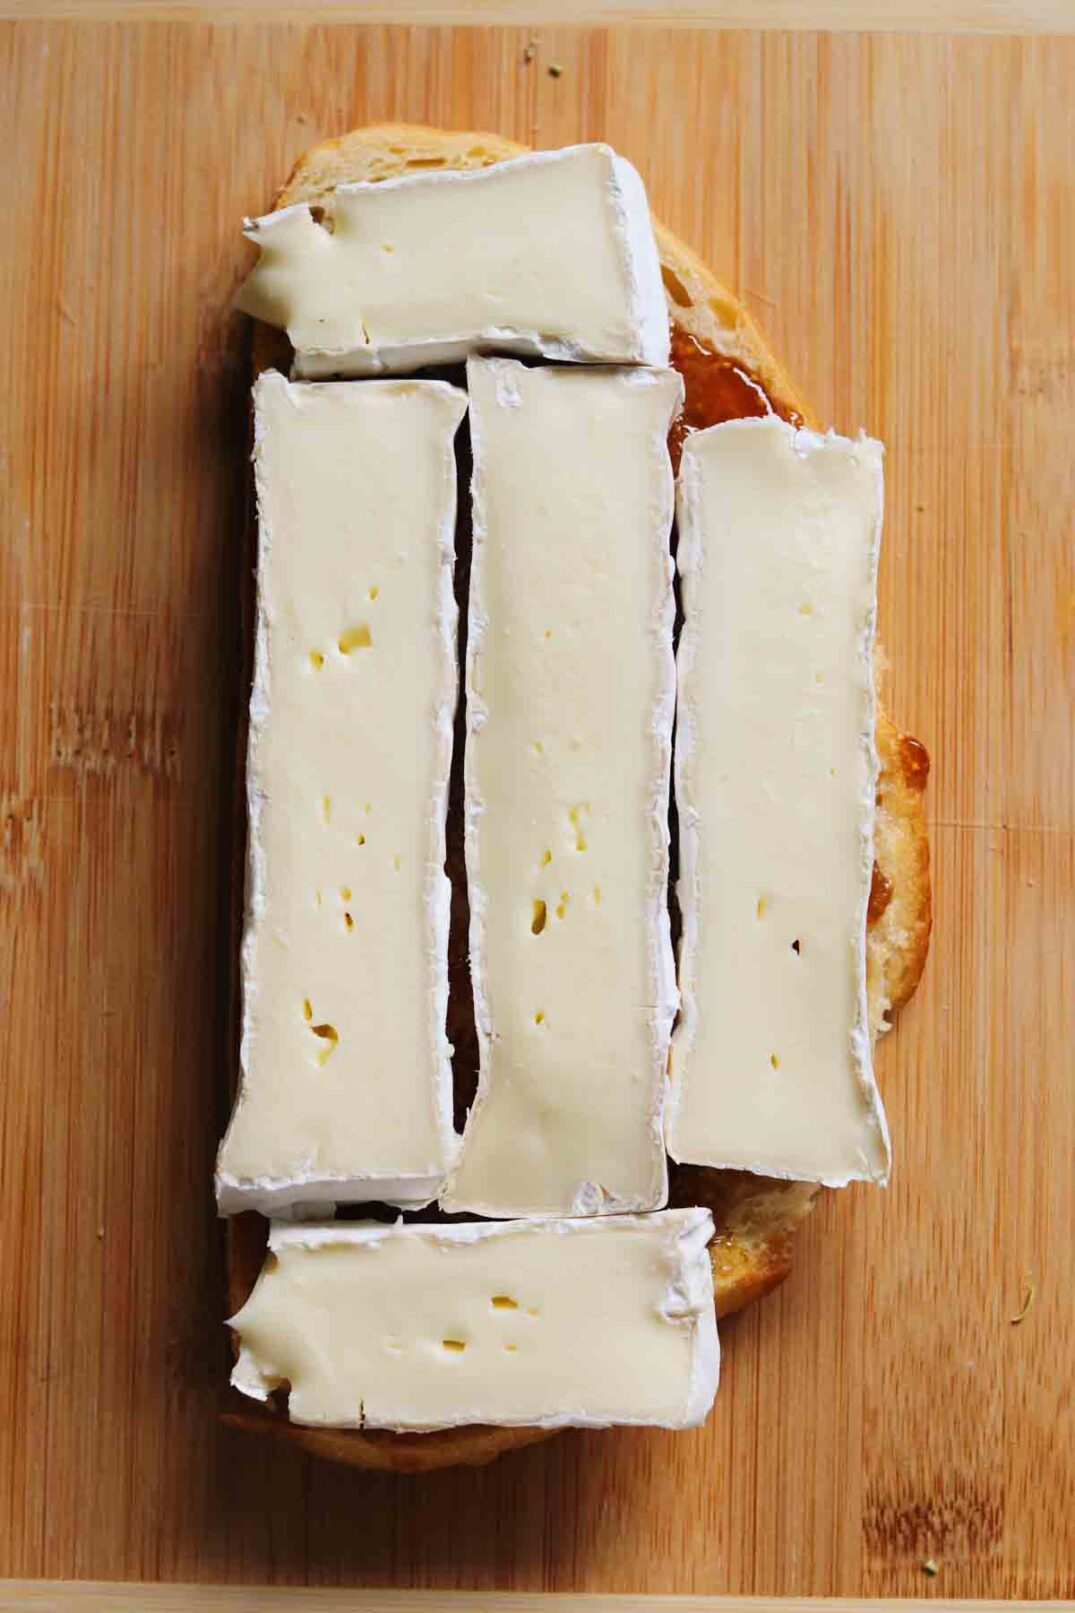 strips of brie on a slice of sourdough.